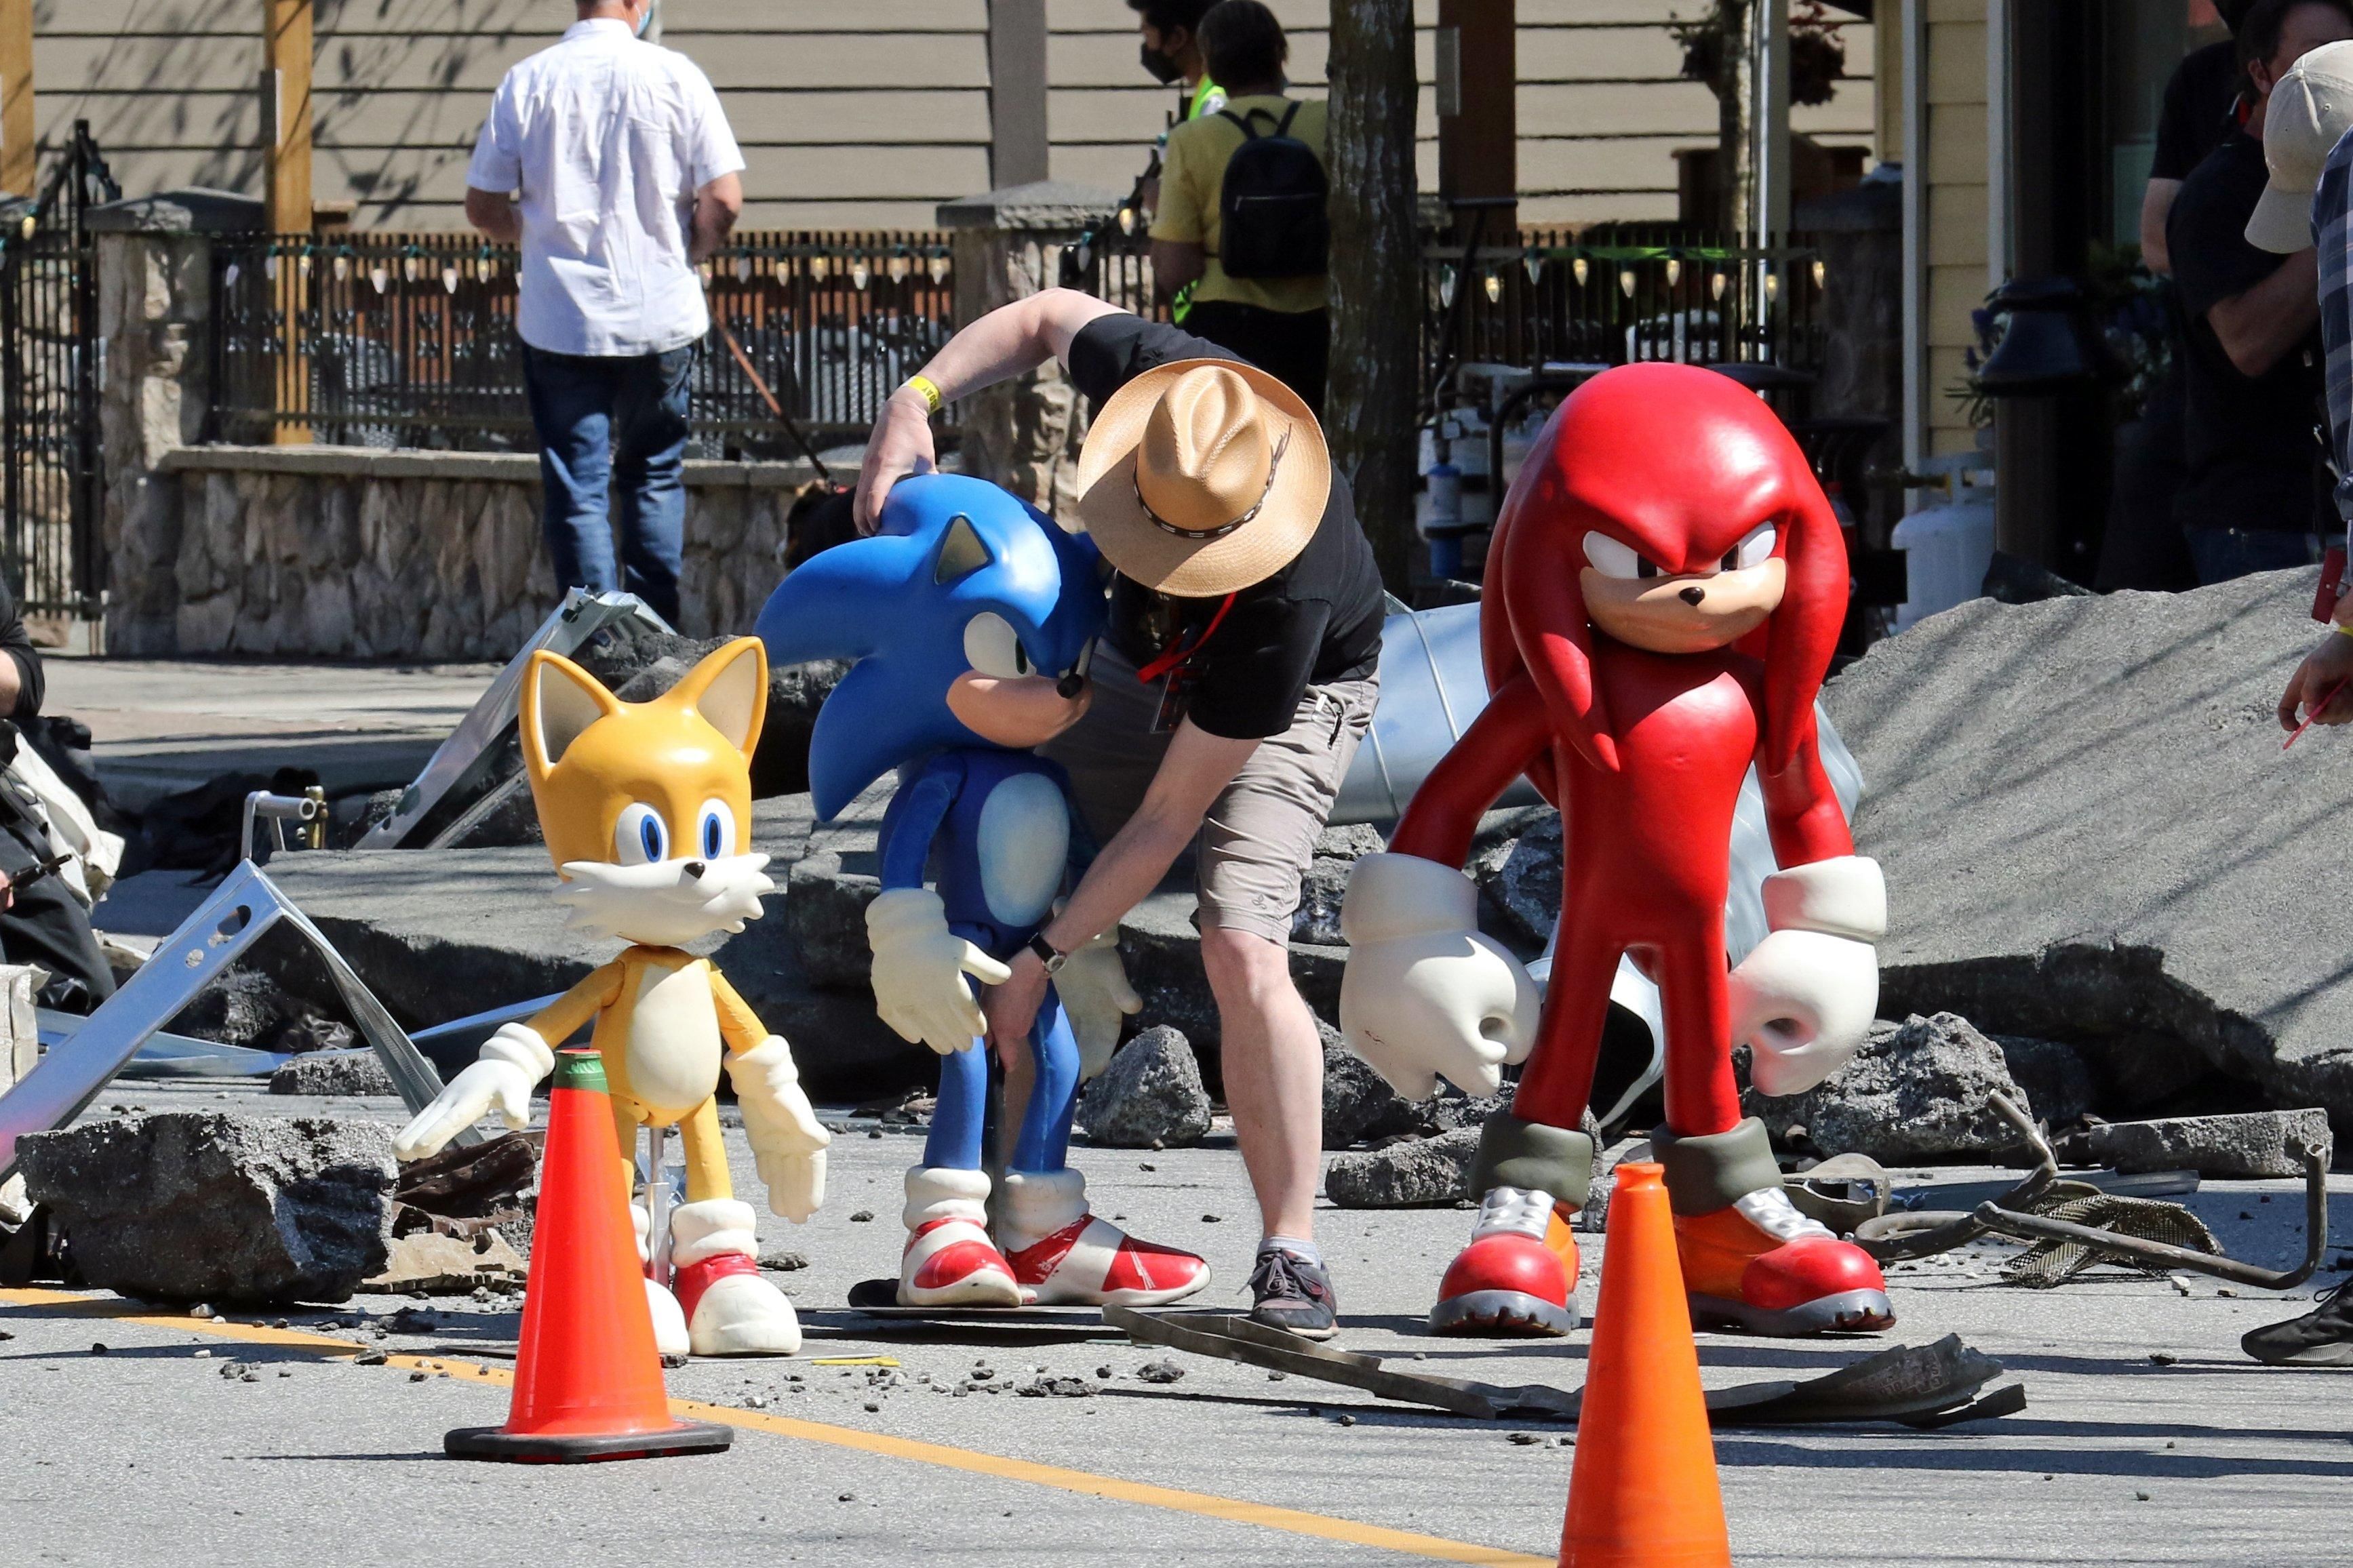 New Set Photos Knuckles Confirmed For Sonic The Hedgehog 2 Movie